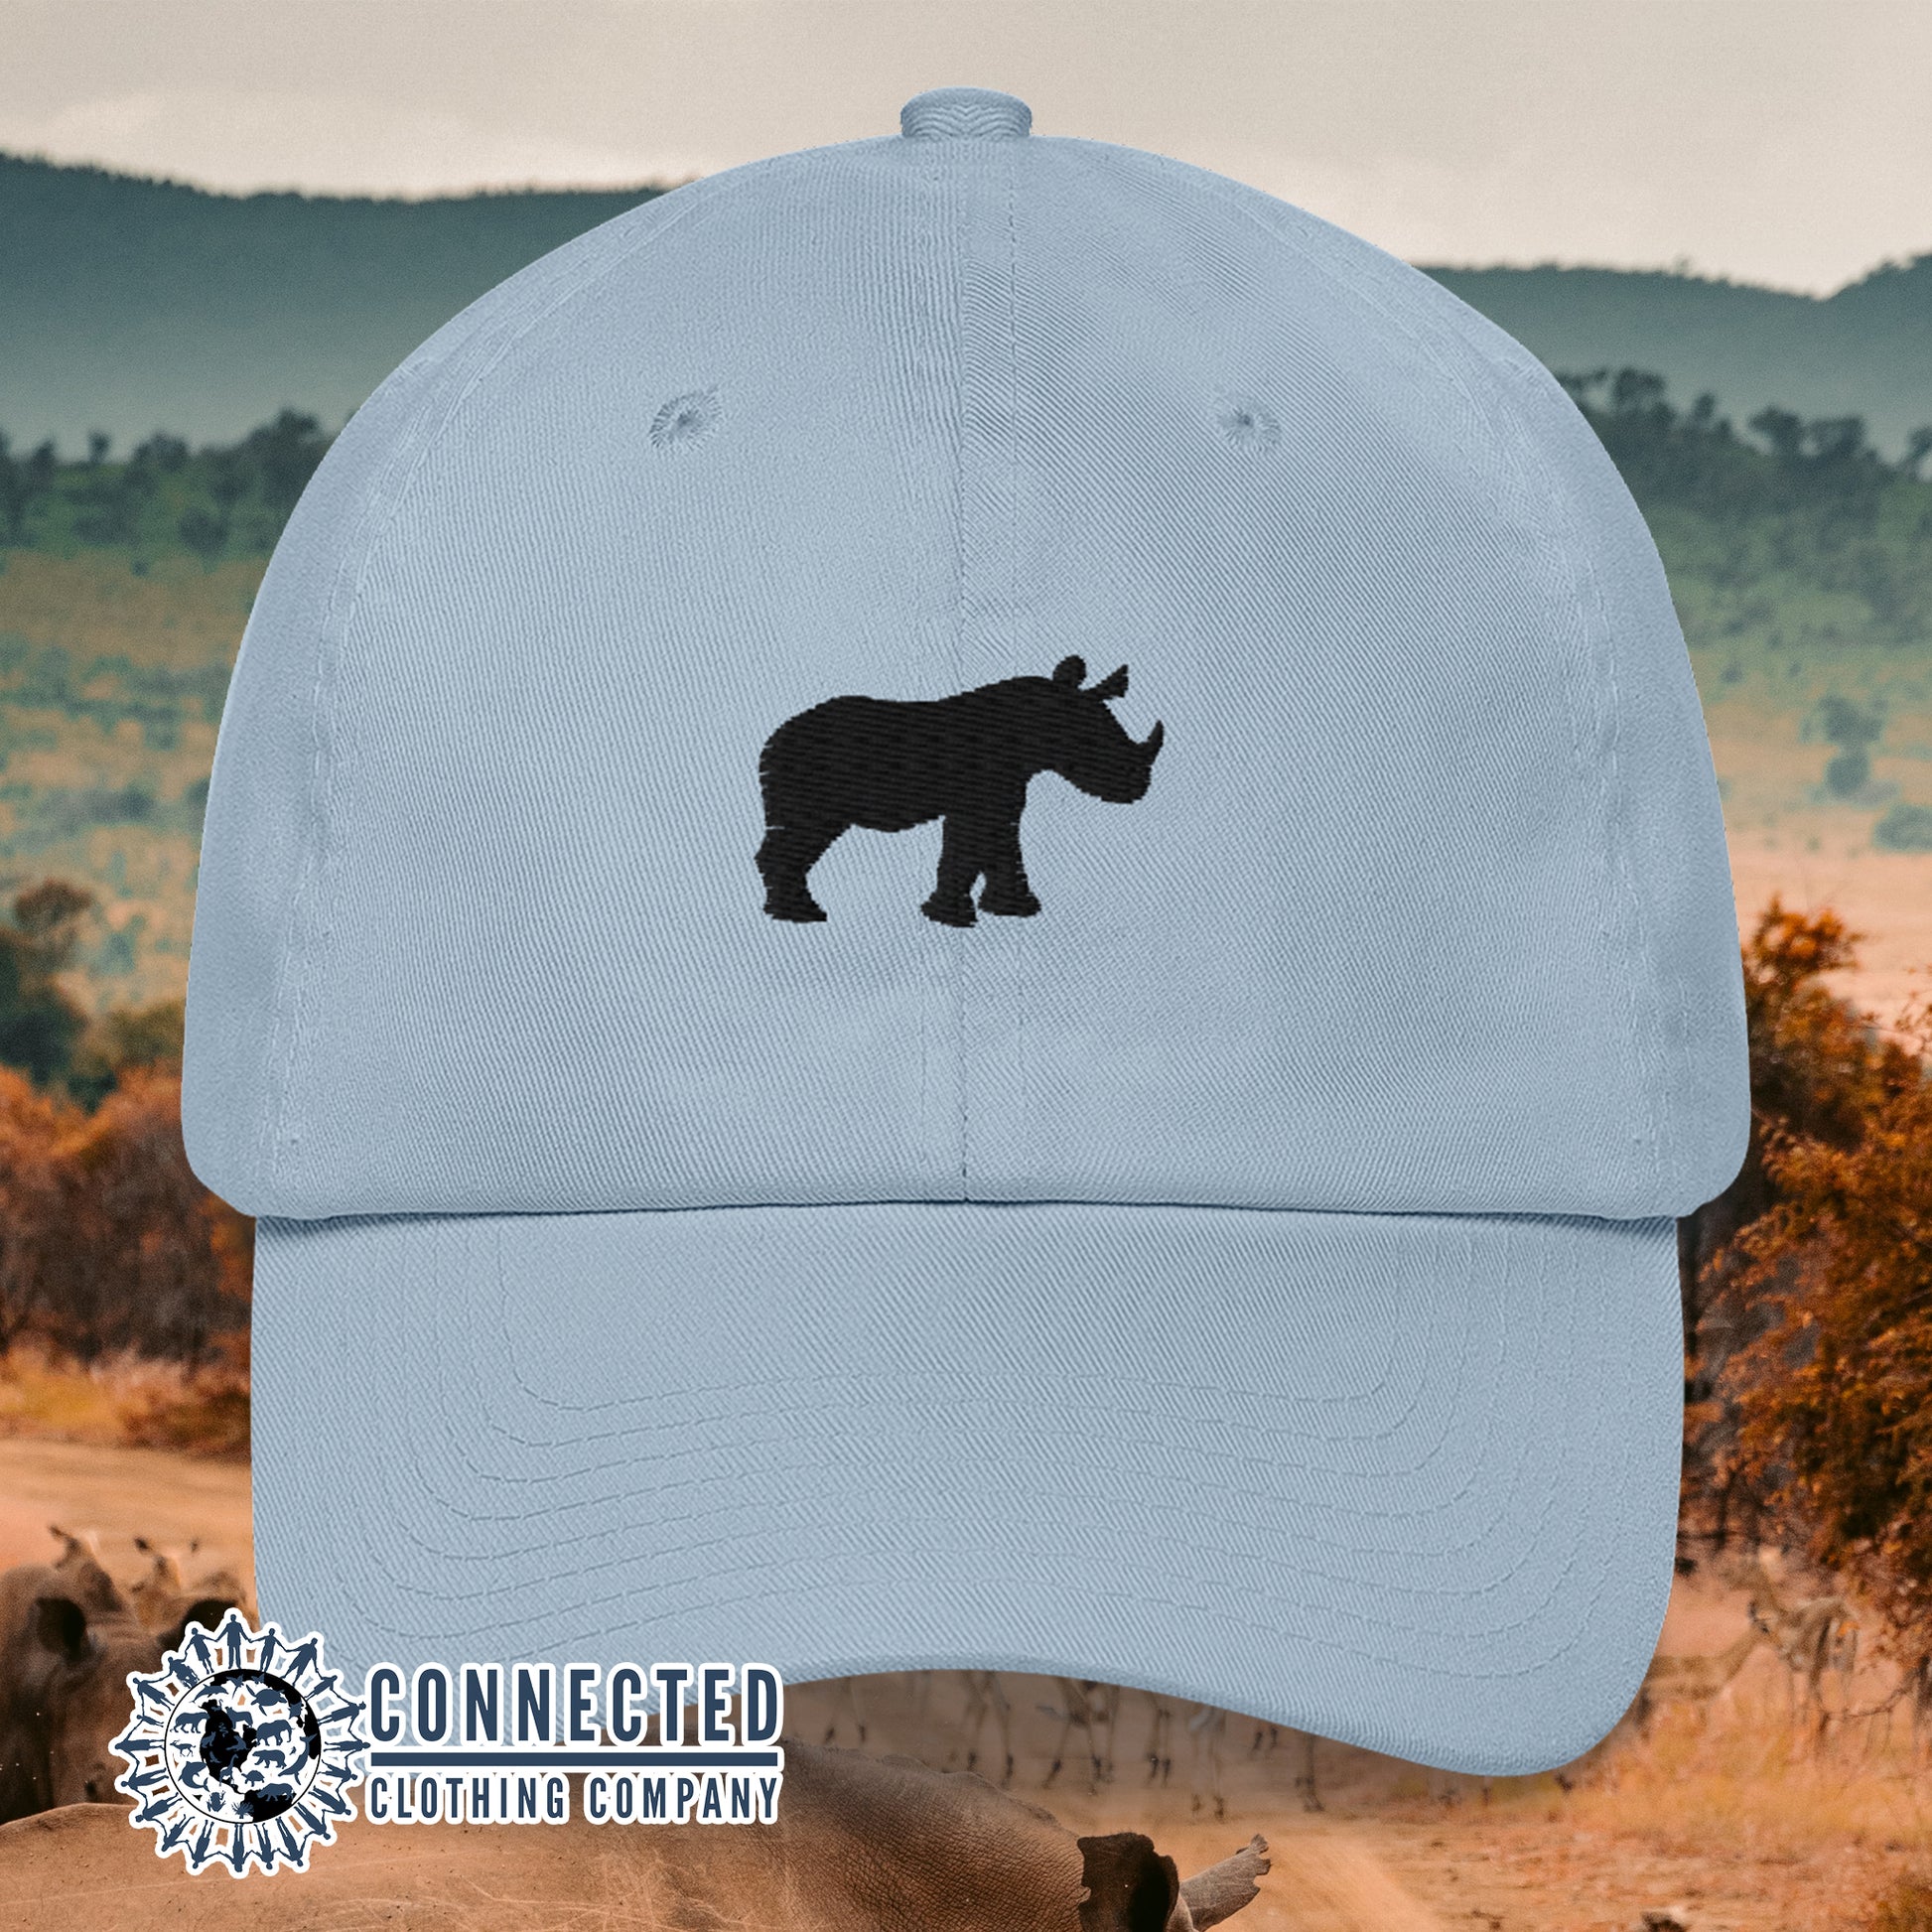 Blue Rhino Cotton Cap - sweetsherriloudesigns - 10% of profits donated to Save The Rhino conservation